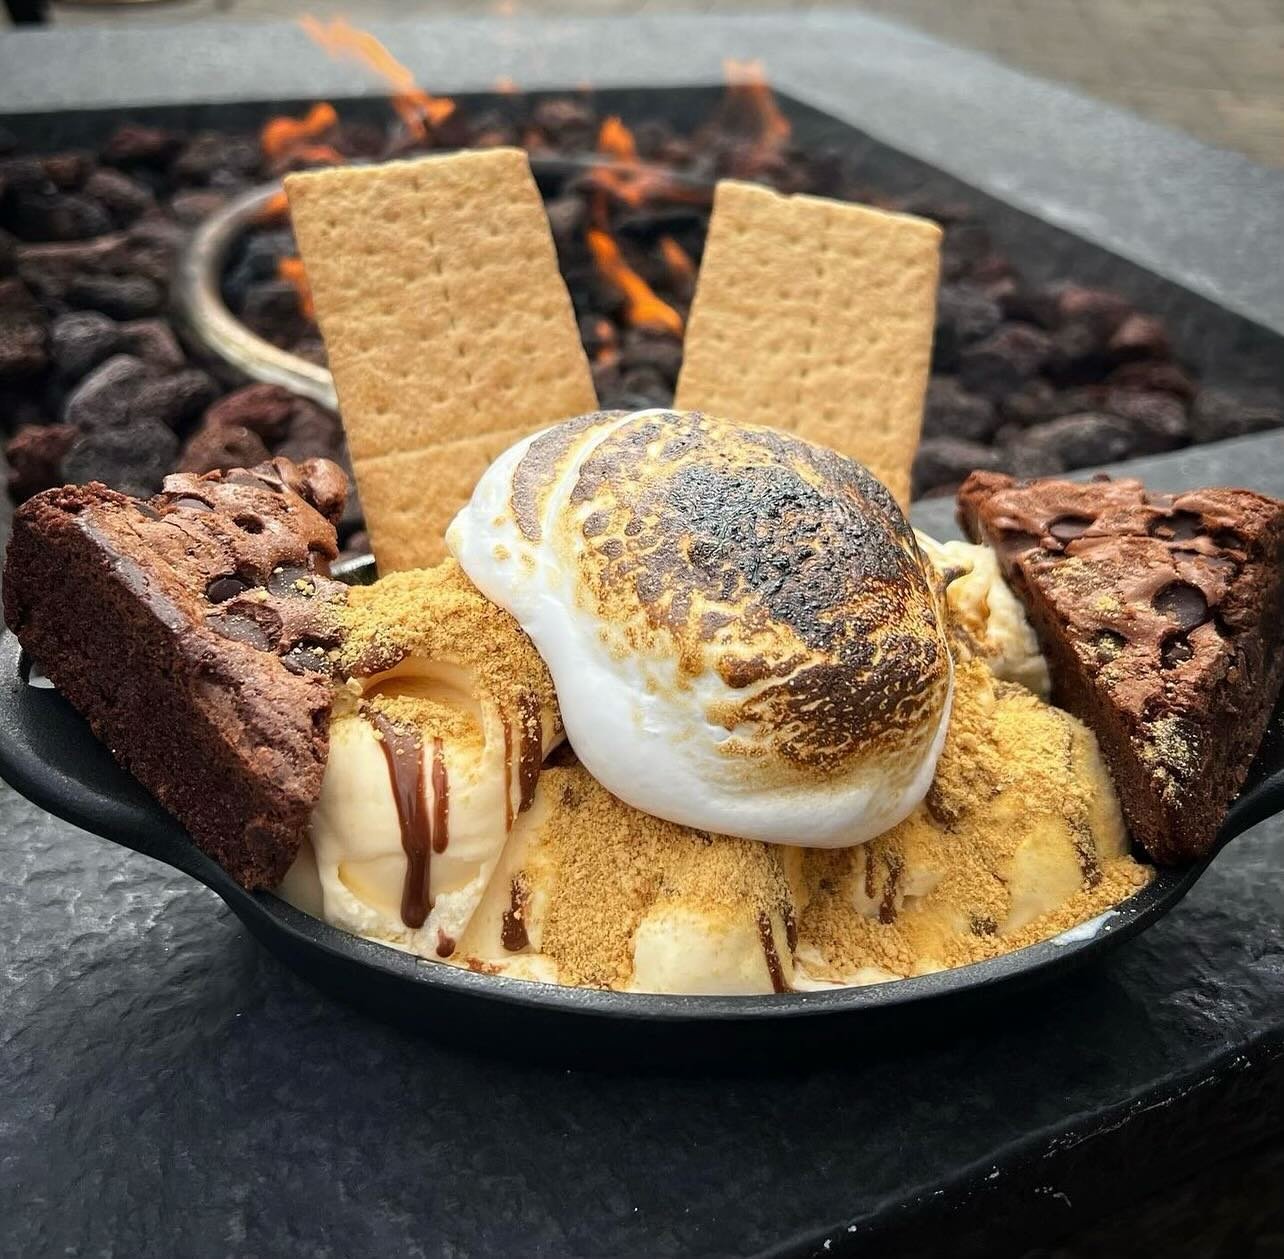 Camp Fire Smore Sundae- Warm brownie topped with vanilla bean ice cream, Finished with caramelized whipped marshmallow, nutella drizzle and honey graham crackers